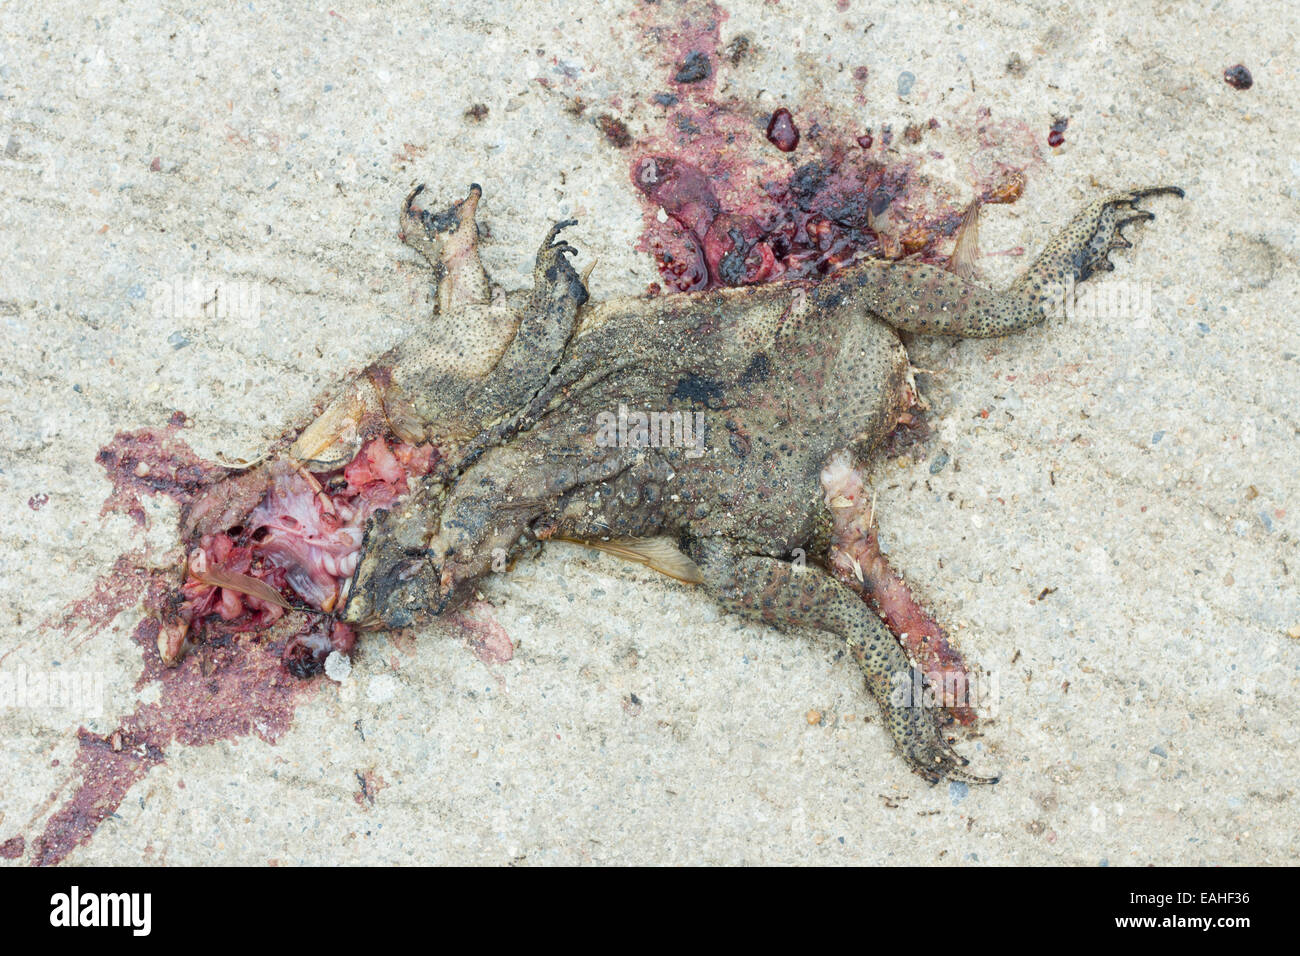 dead toad on road Stock Photo